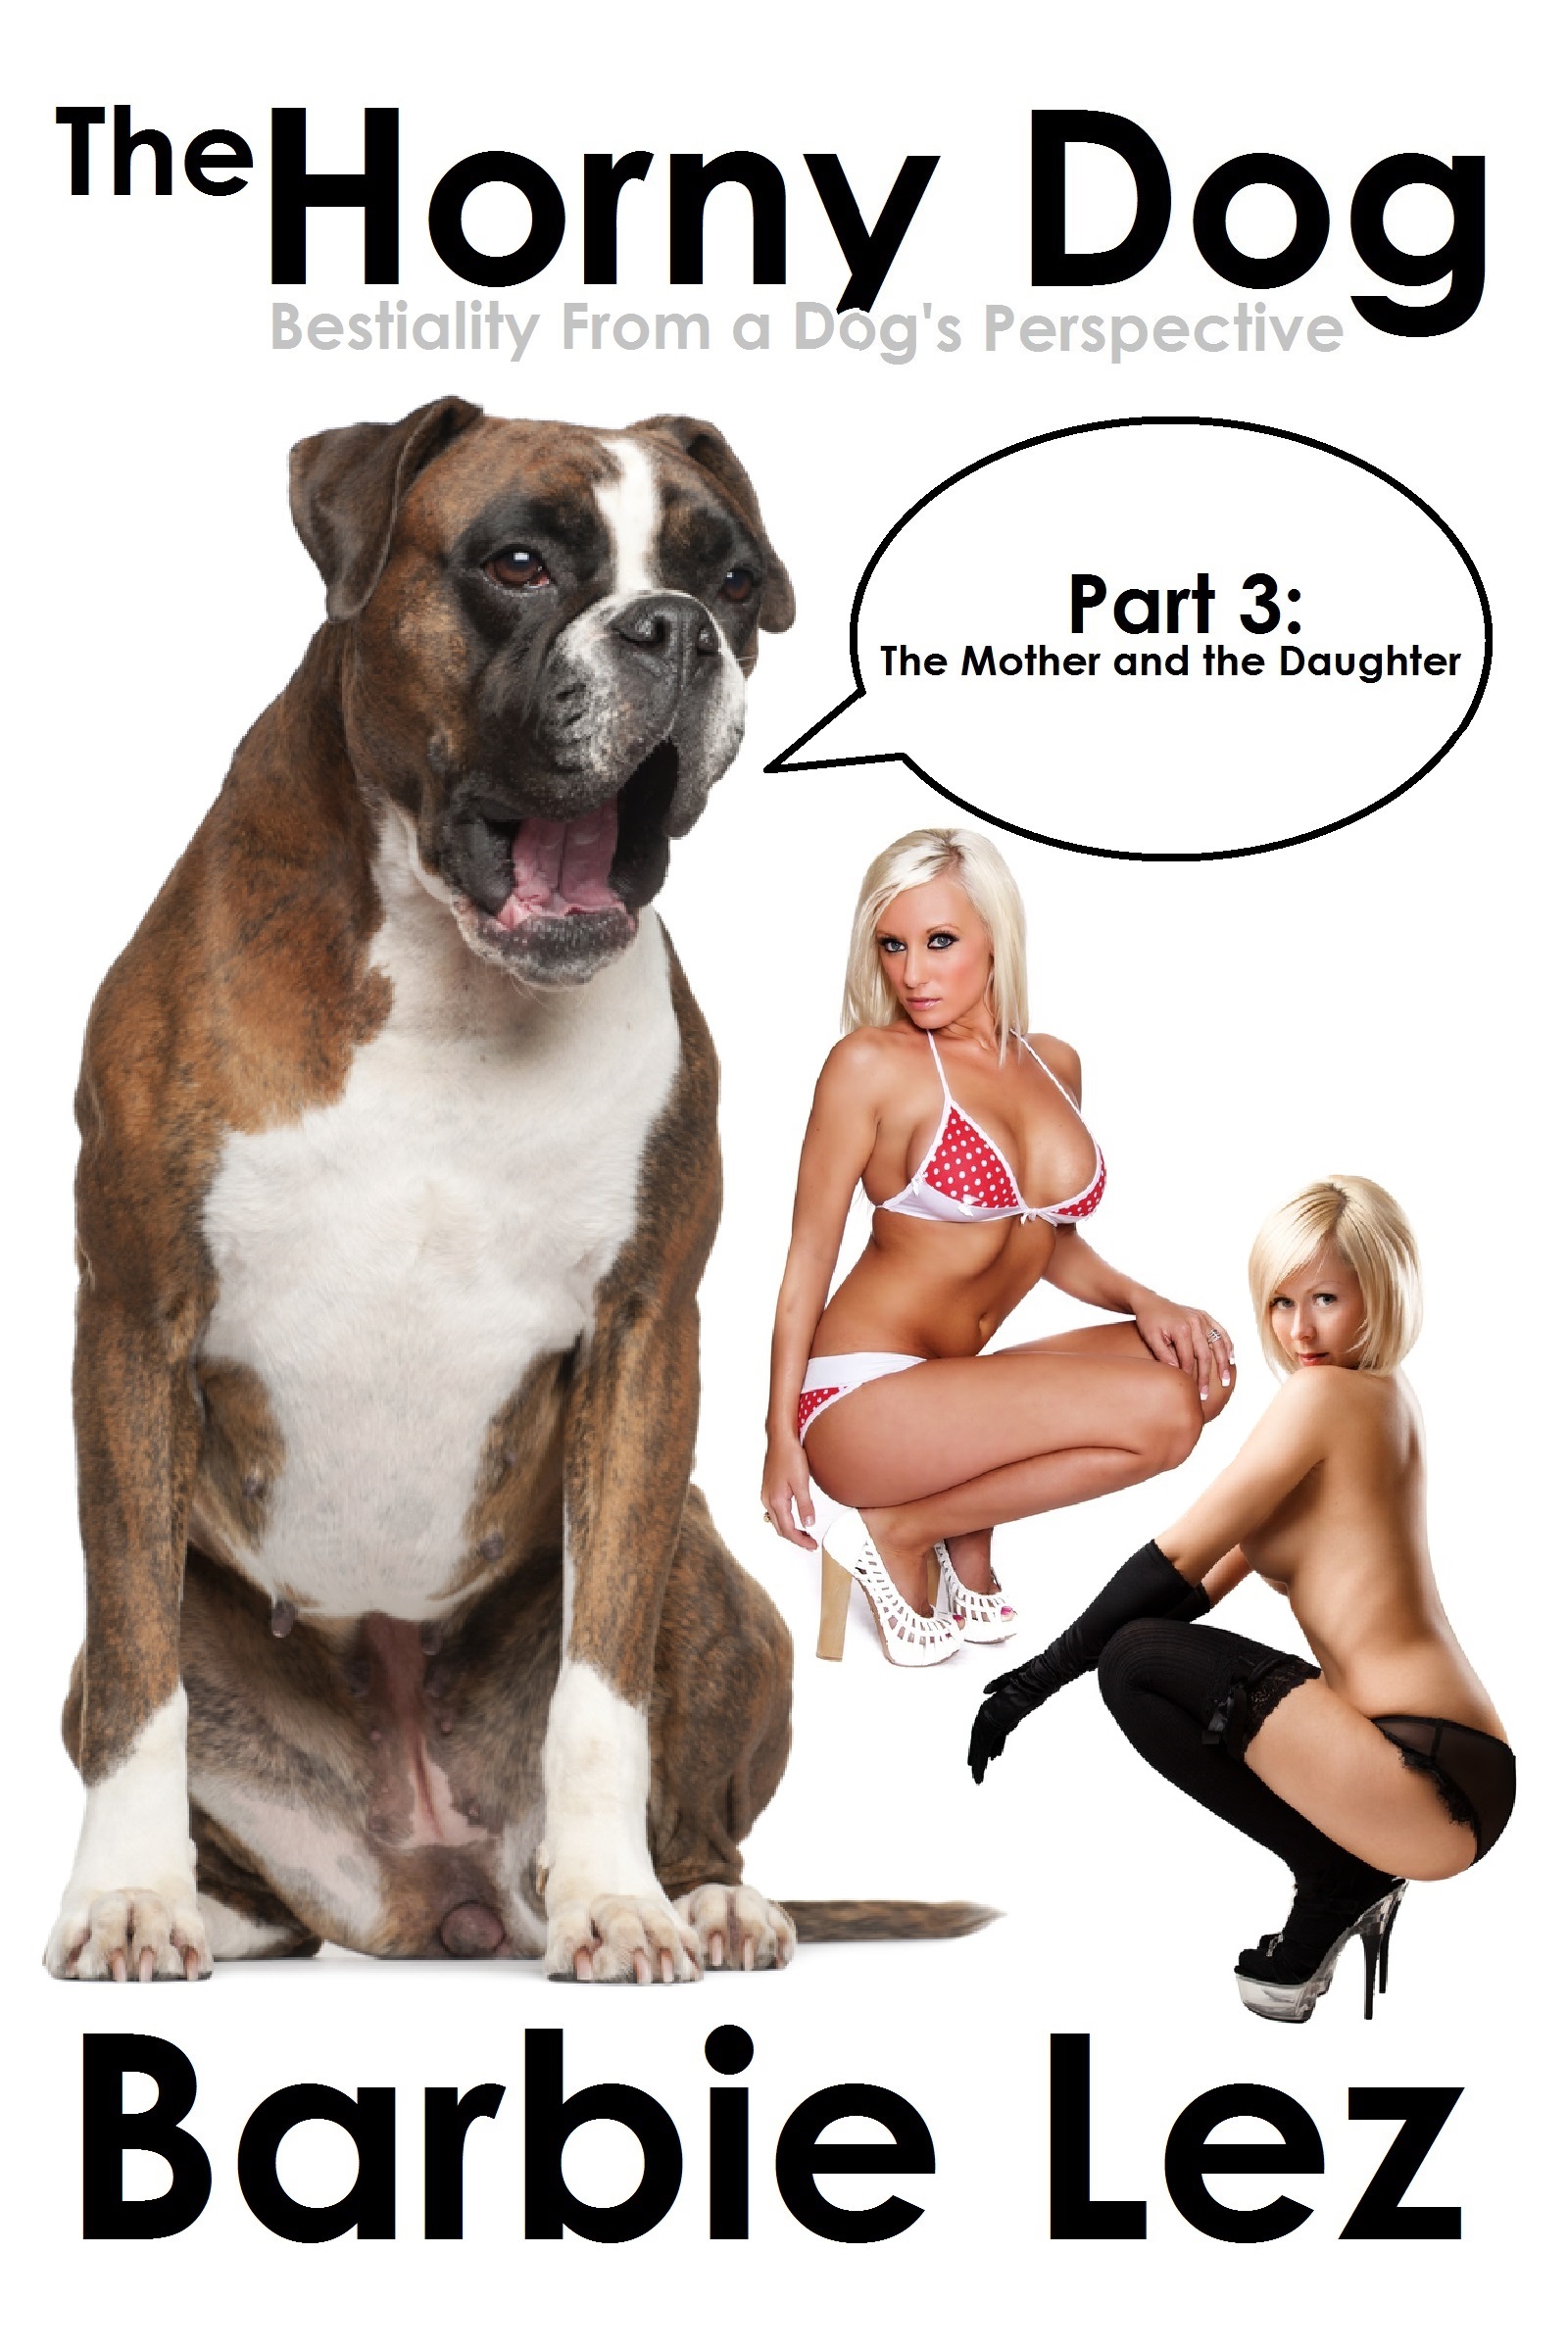 Daughter Dog Porn - Smashwords â€“ The Horny Dog - Part 3: The Mother and the Daughter  (Bestiality from a Dog's Perspective) â€“ a book by Barbie Lez